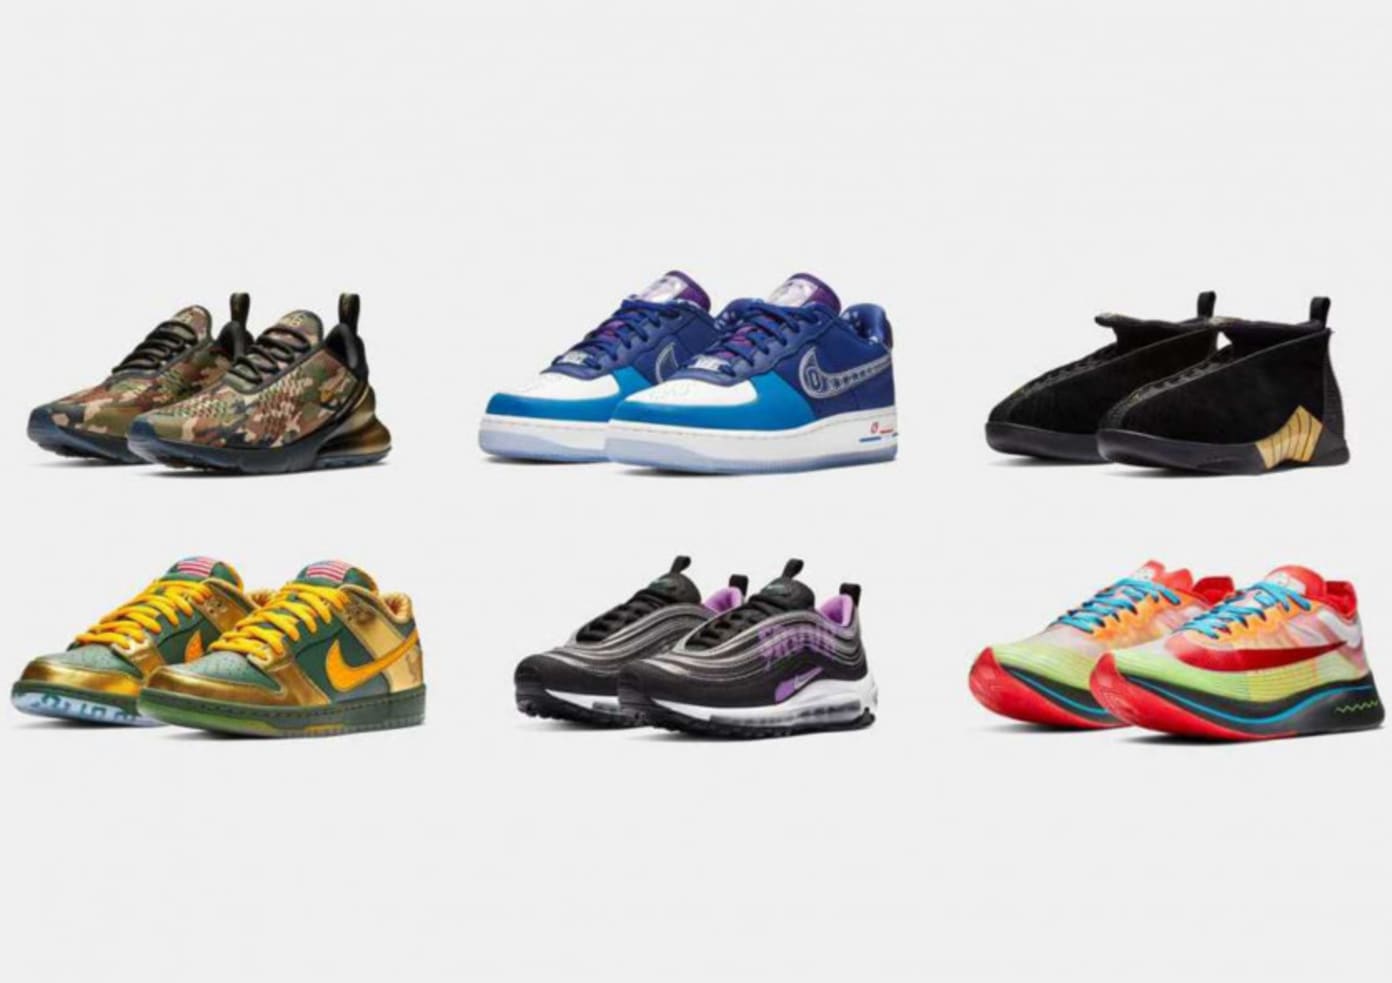 The Doernbecher x Nike Freestyle 2018 Collection